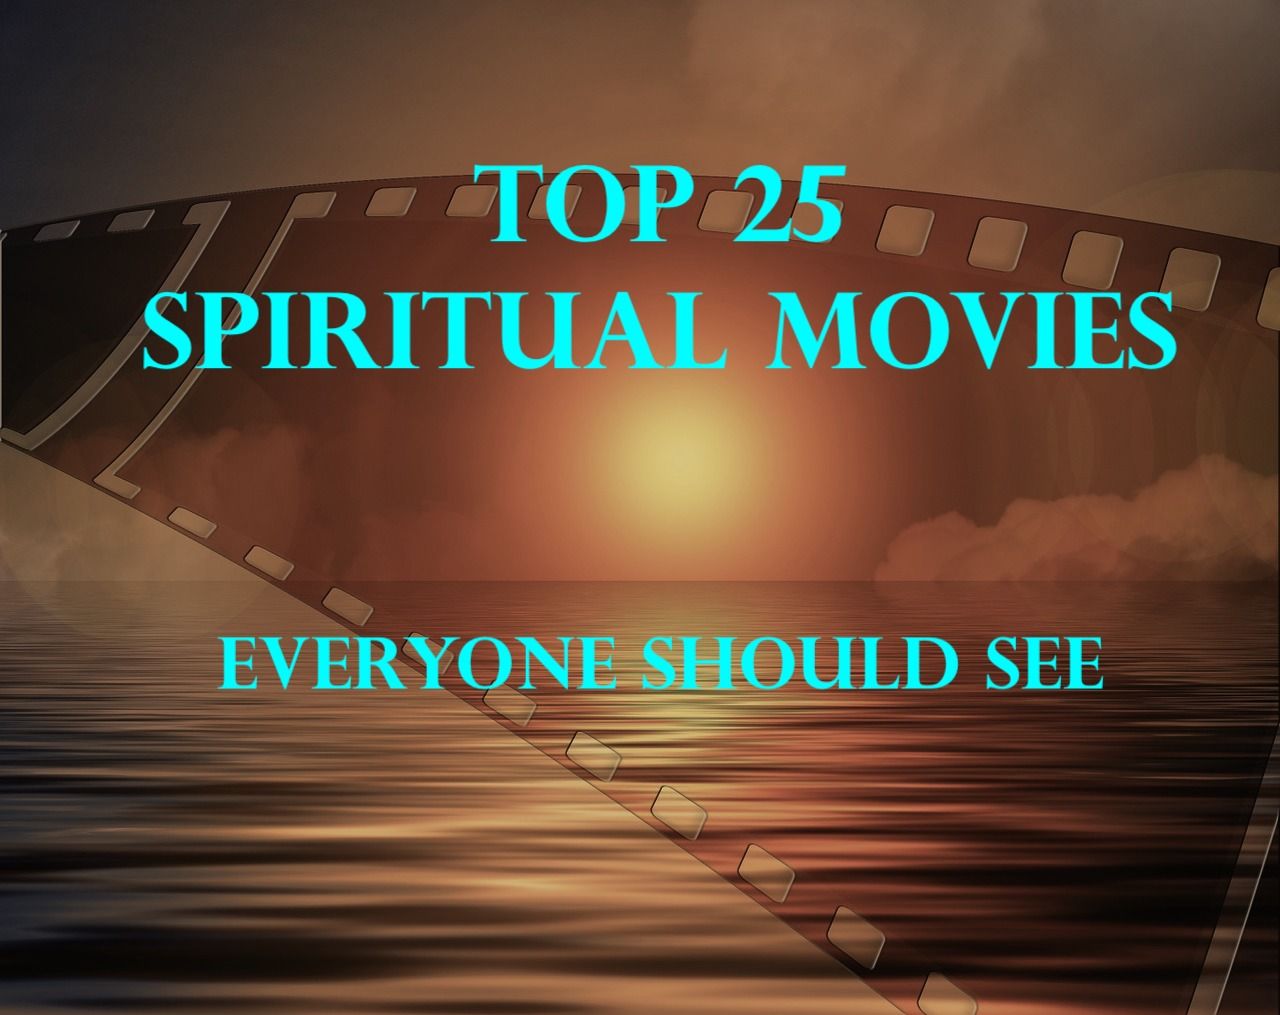 Top 25 Spiritual Movies to Watch now that you have to #StayHome